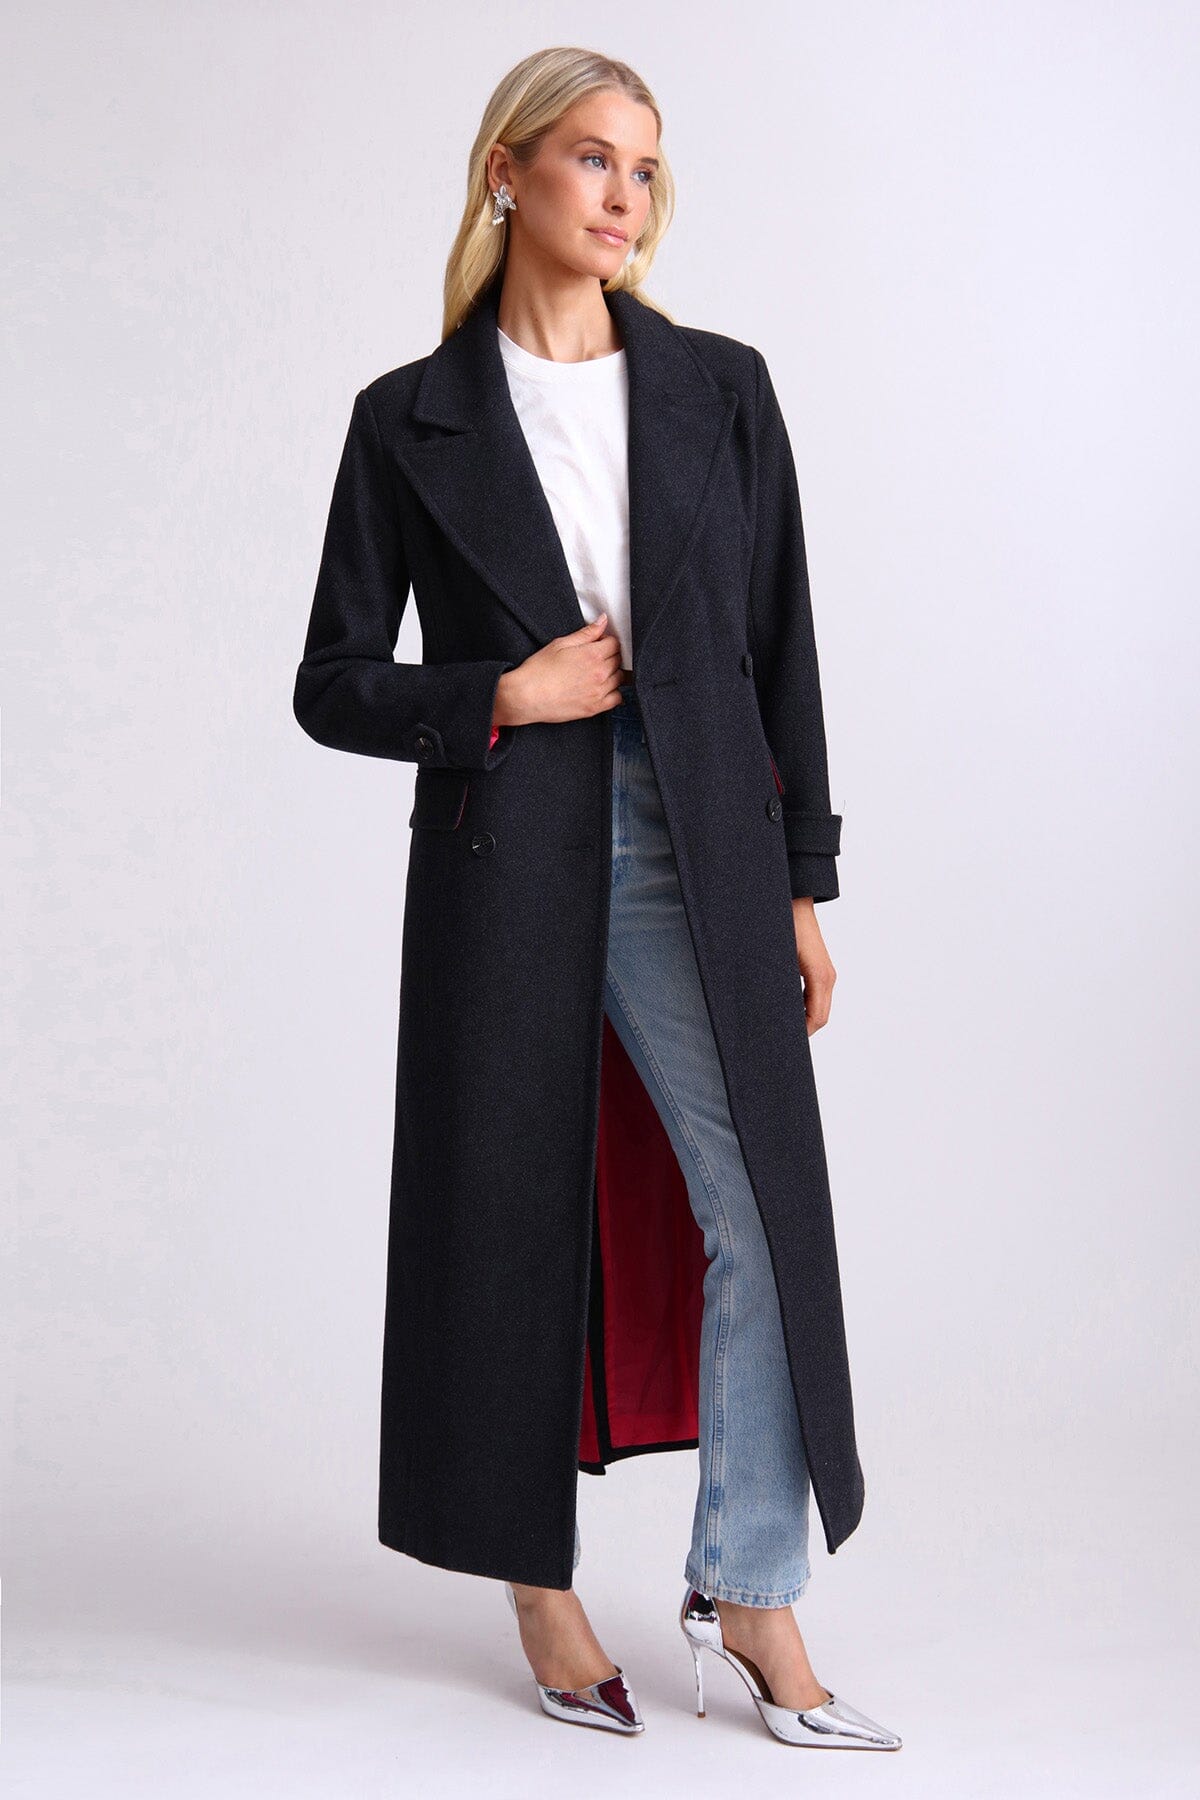 Black strong shoulder tailored wool blend long coat - figure flattering office to date night coats jackets for ladies